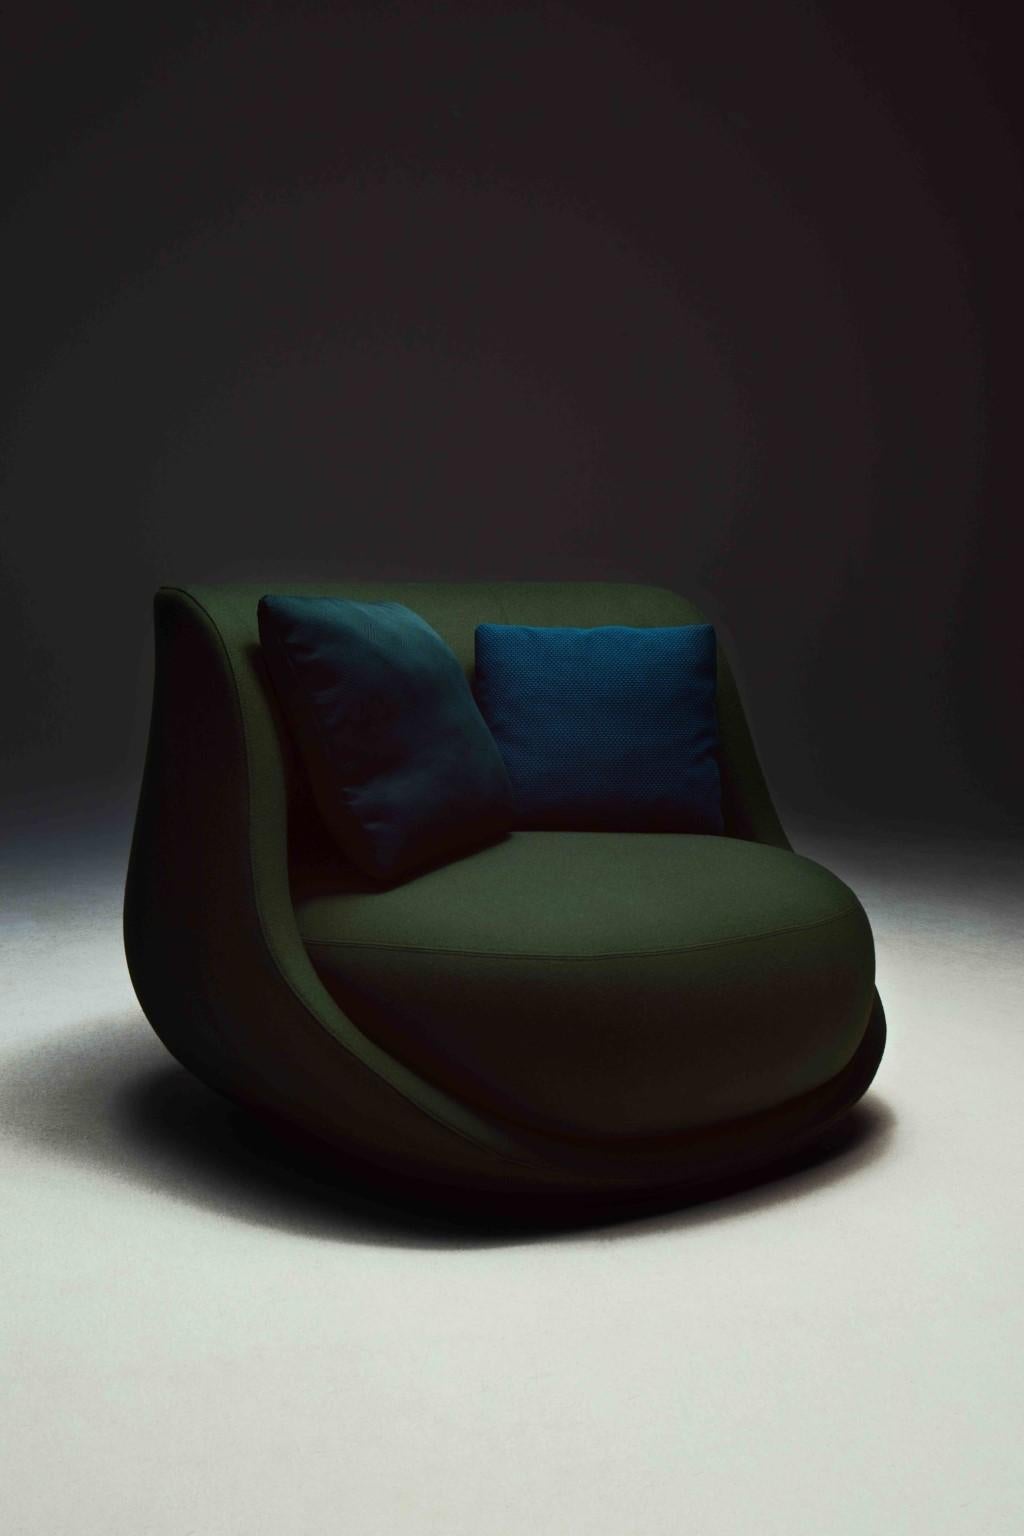 Canapé sofa by Luca Nichetto 
Dimensions: W 175 x D 106 x H 77
Materials: fabric 
Also available in leather.

Liaison is the story of a daring shell, formed to wrap within a soft cocoon of seating. Generous in appearance, the welcoming